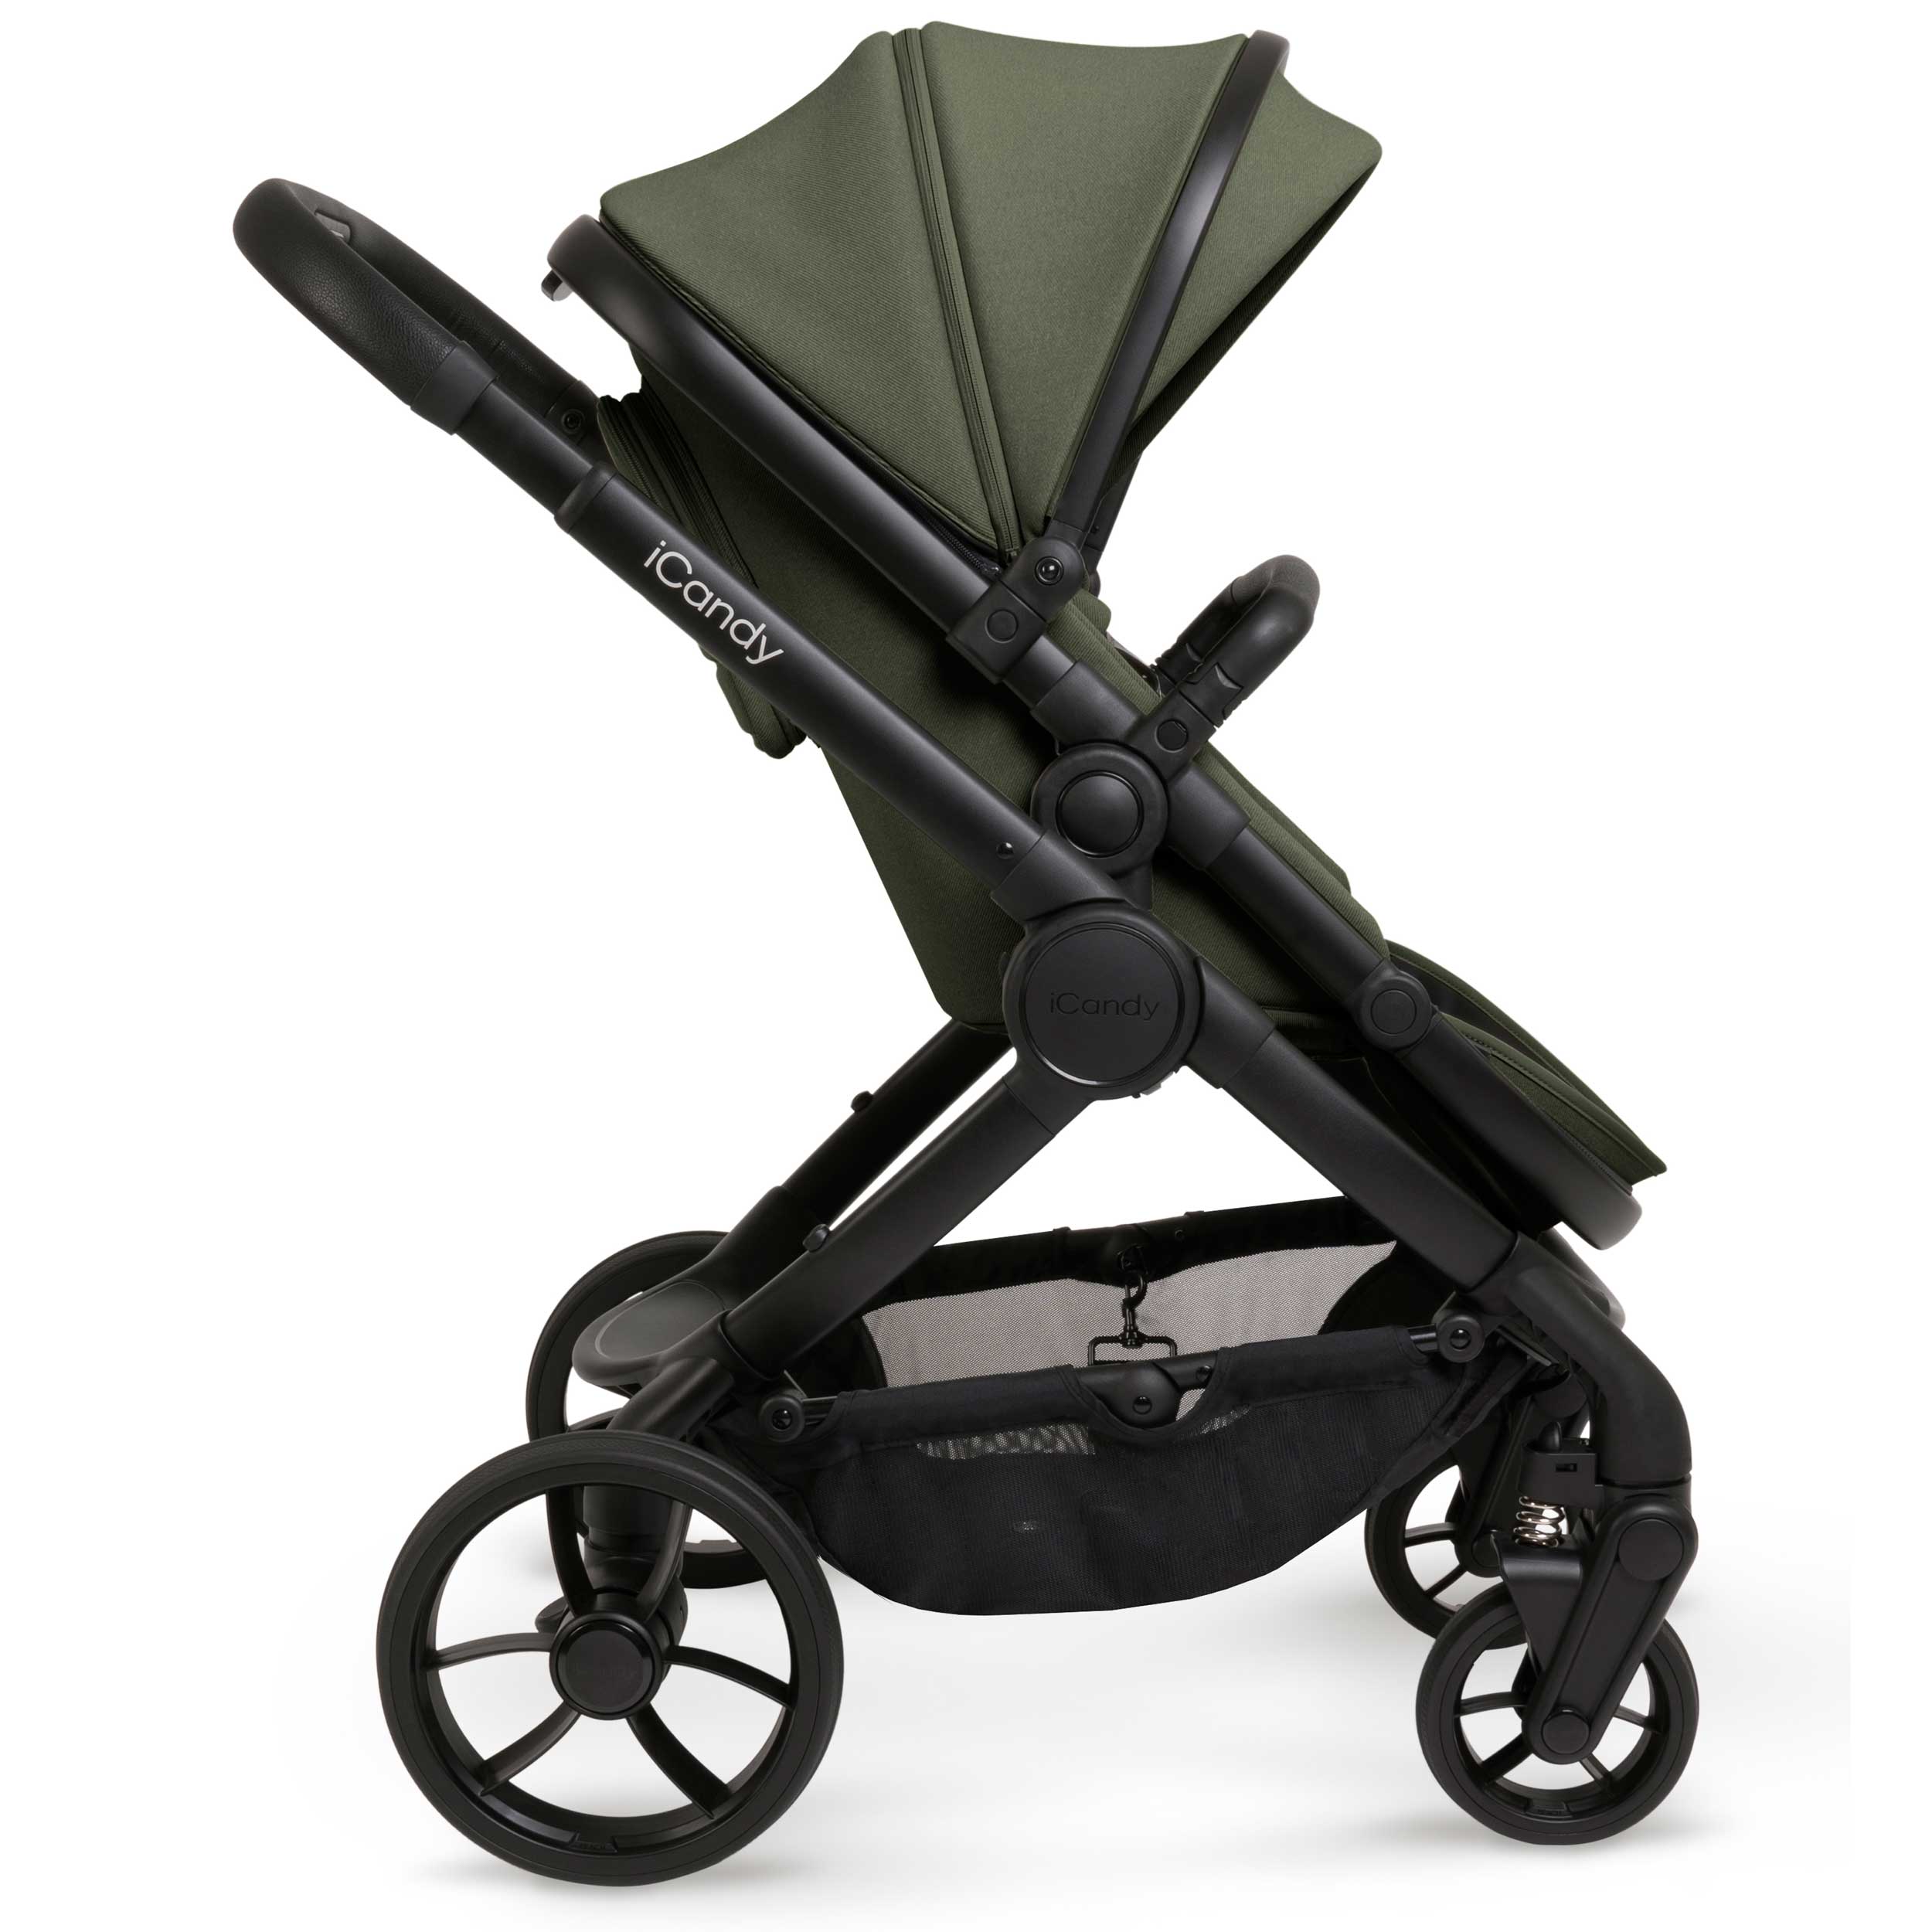 iCandy Peach 7 Cybex Combo Set in Ivy